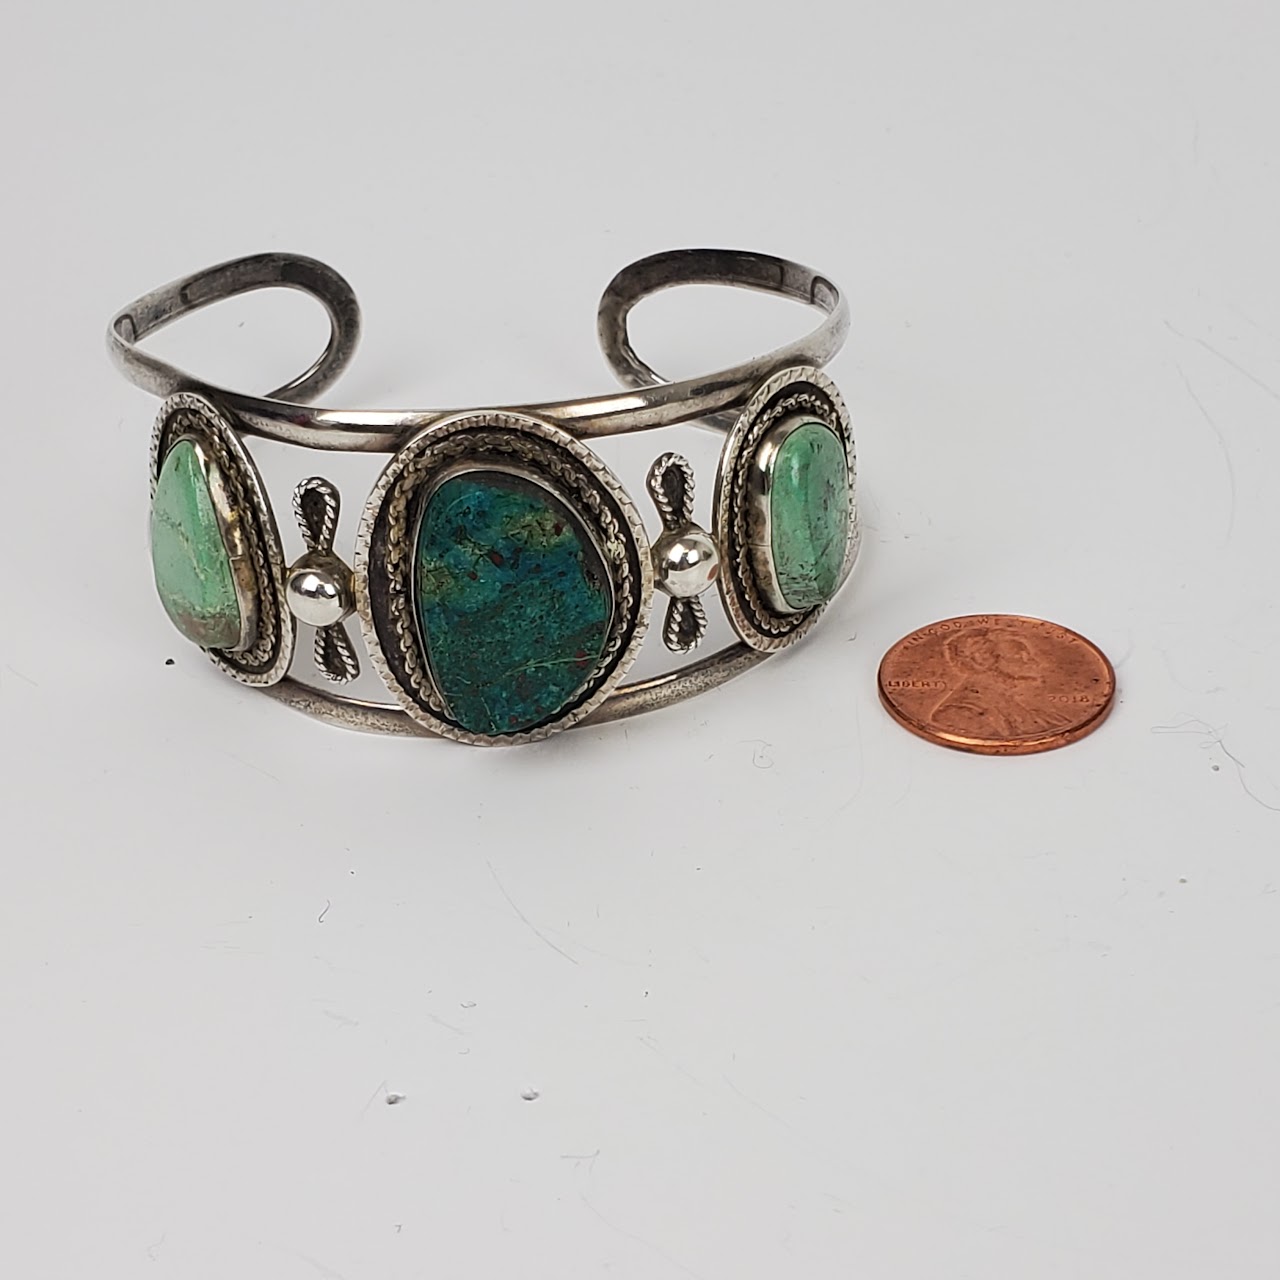 Sterling Silver Turquoise Cuff Bracelet